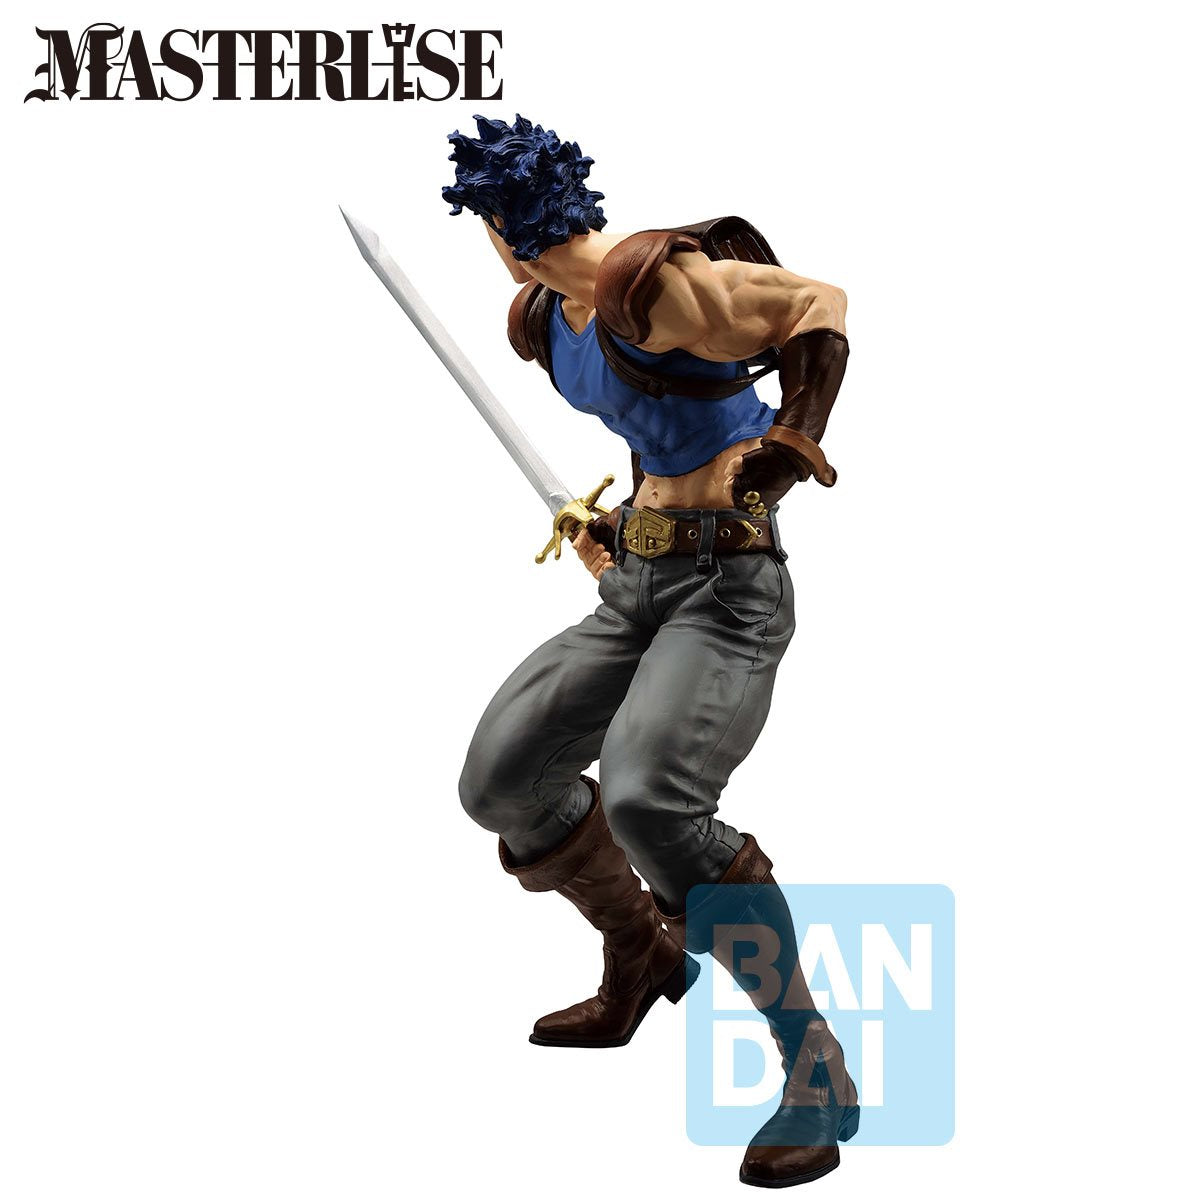 A Jonathan Joestar figure from the Masterlise series presented by Ichibankuji. This Joestar figure features him weilding a sword.